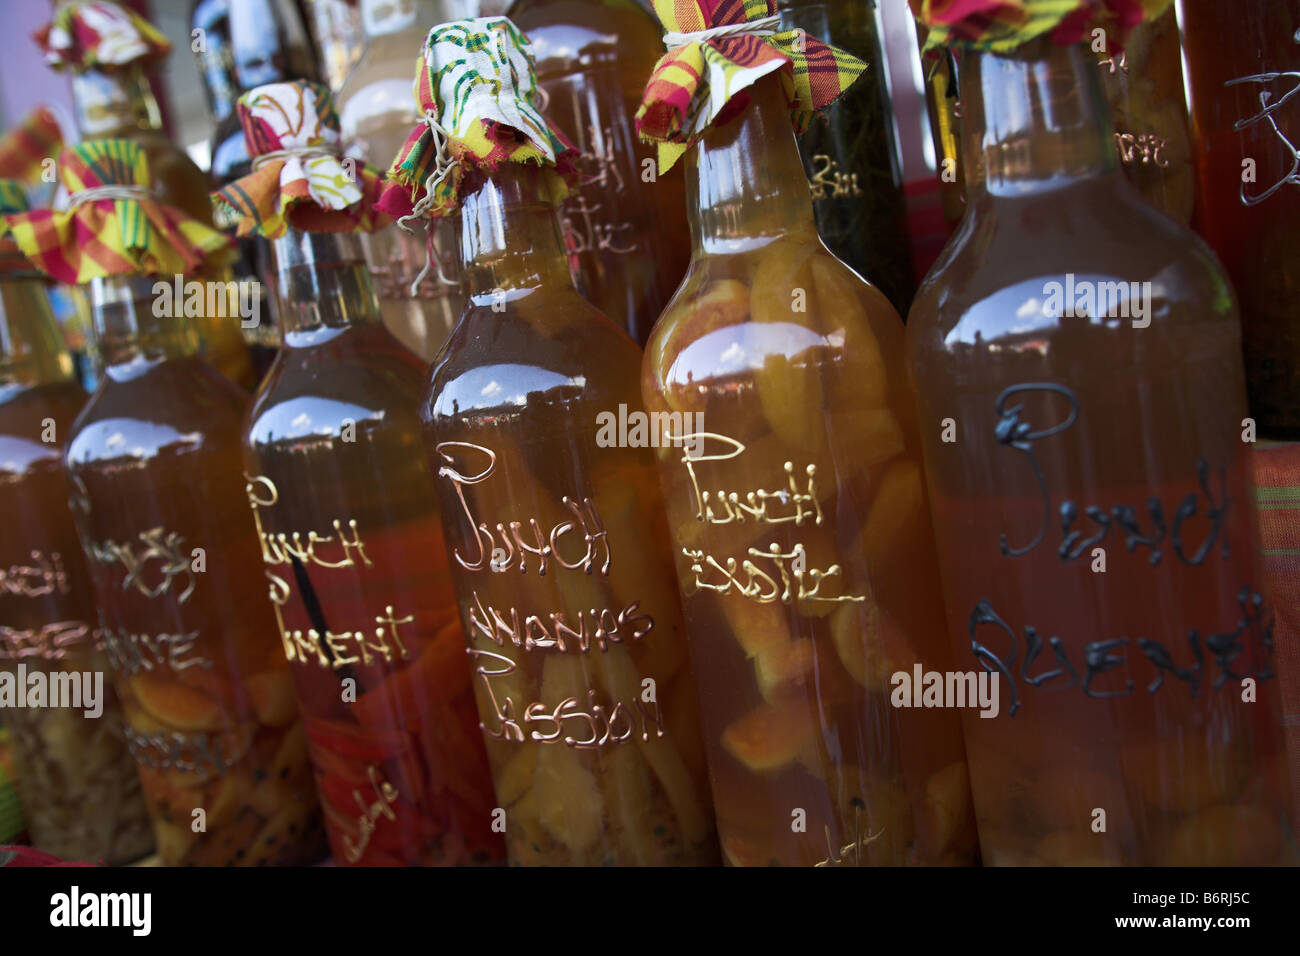 Bottles of flavoured rum in Pointe A Pitre, Grande Terre, Guadeloupe, Caribbean in the French West Indies Stock Photo